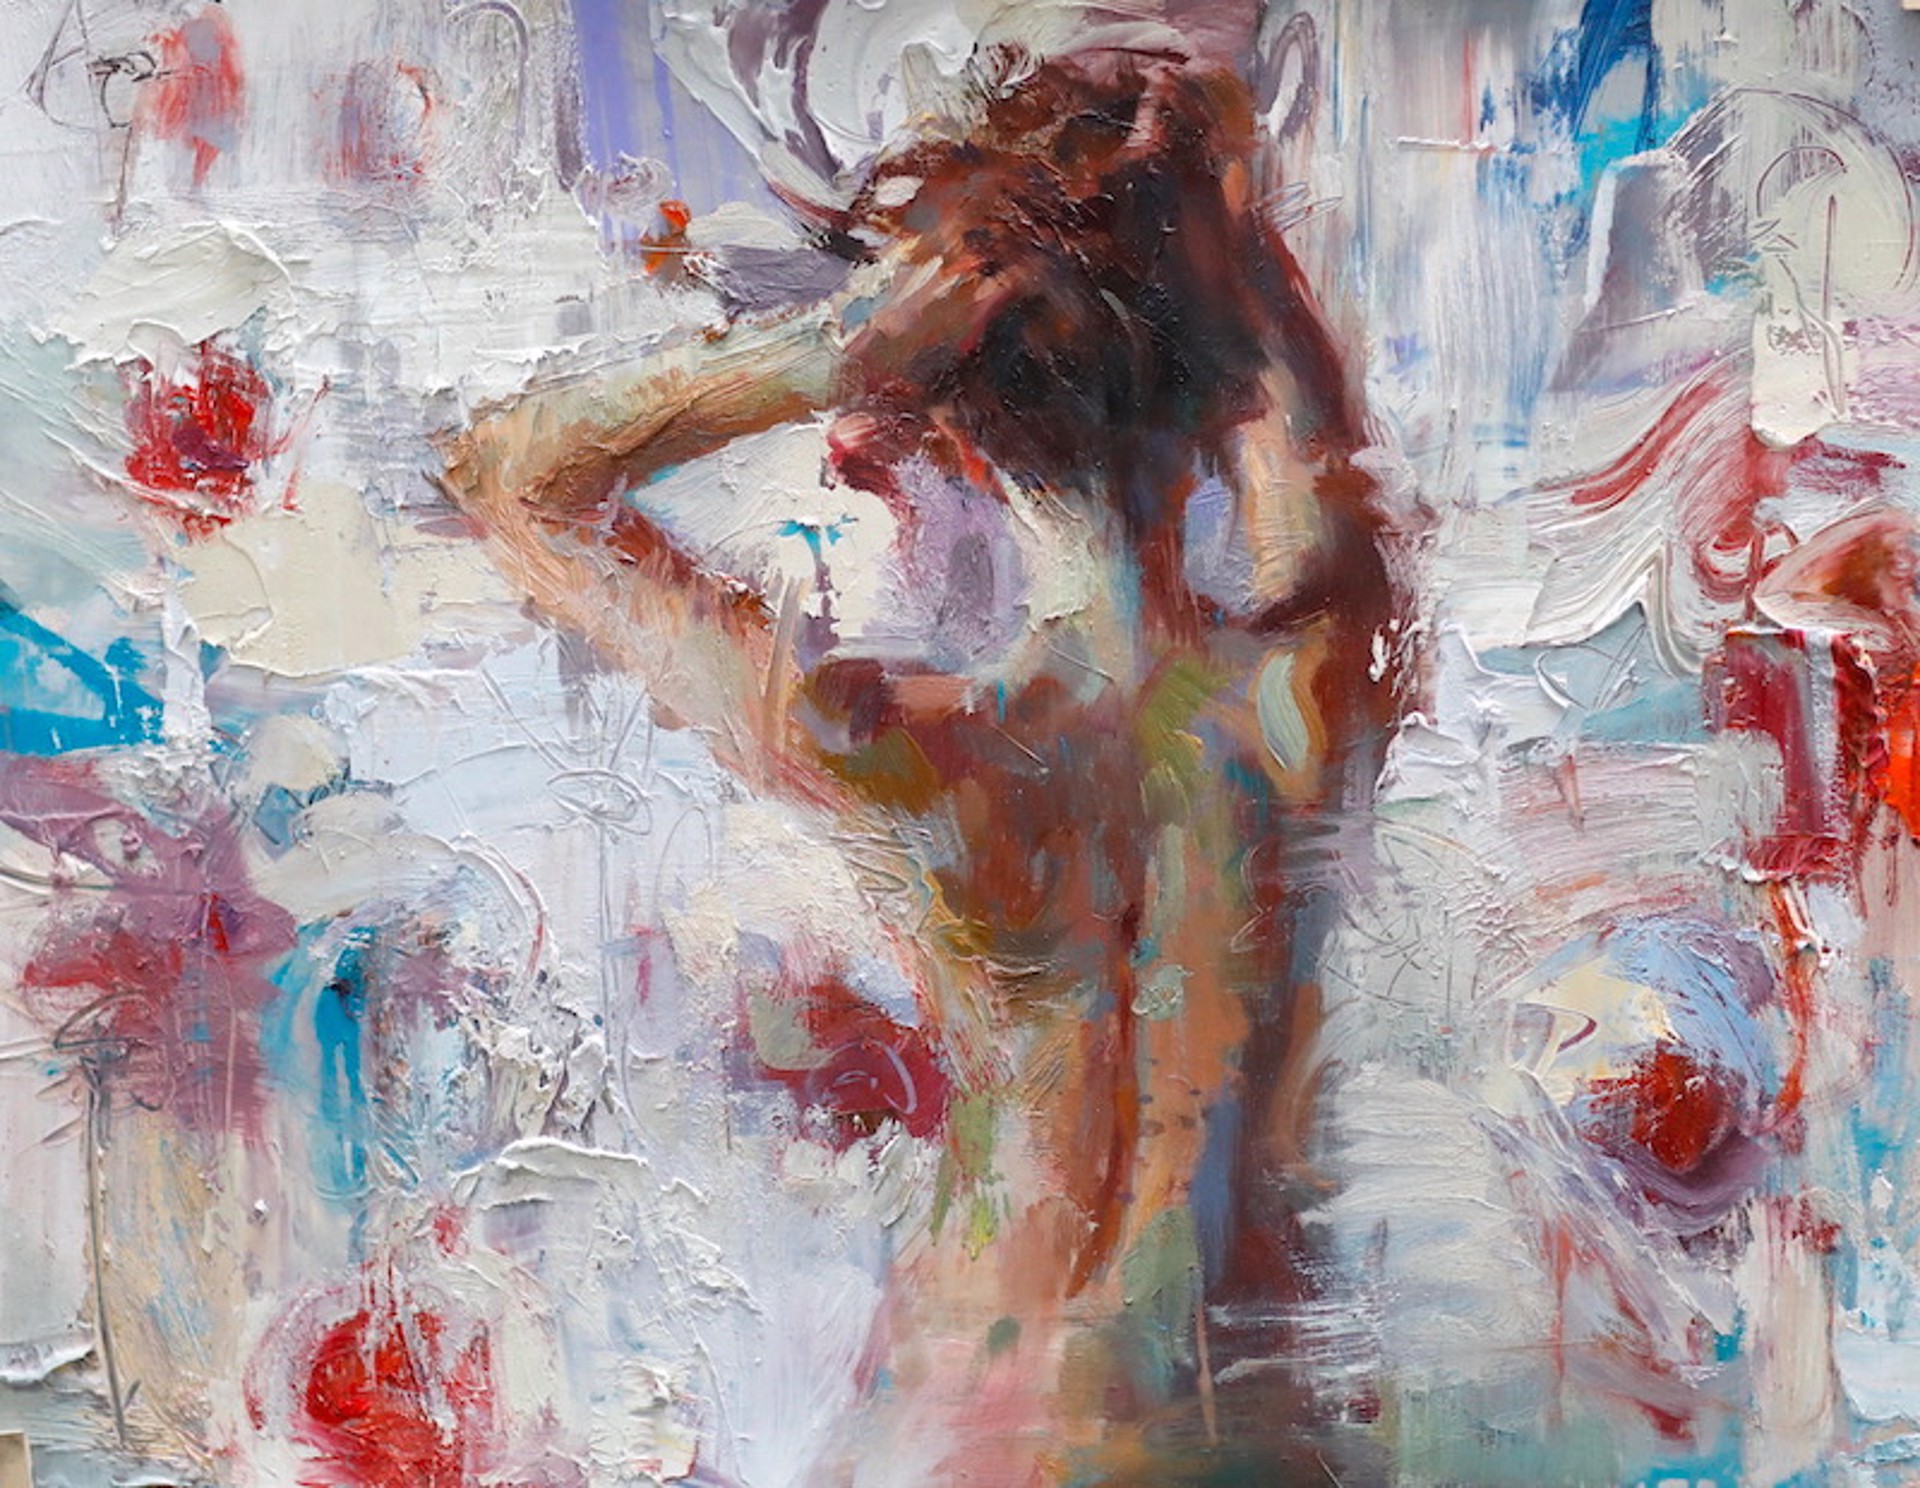 Elusive Tranquility by Henry Asencio